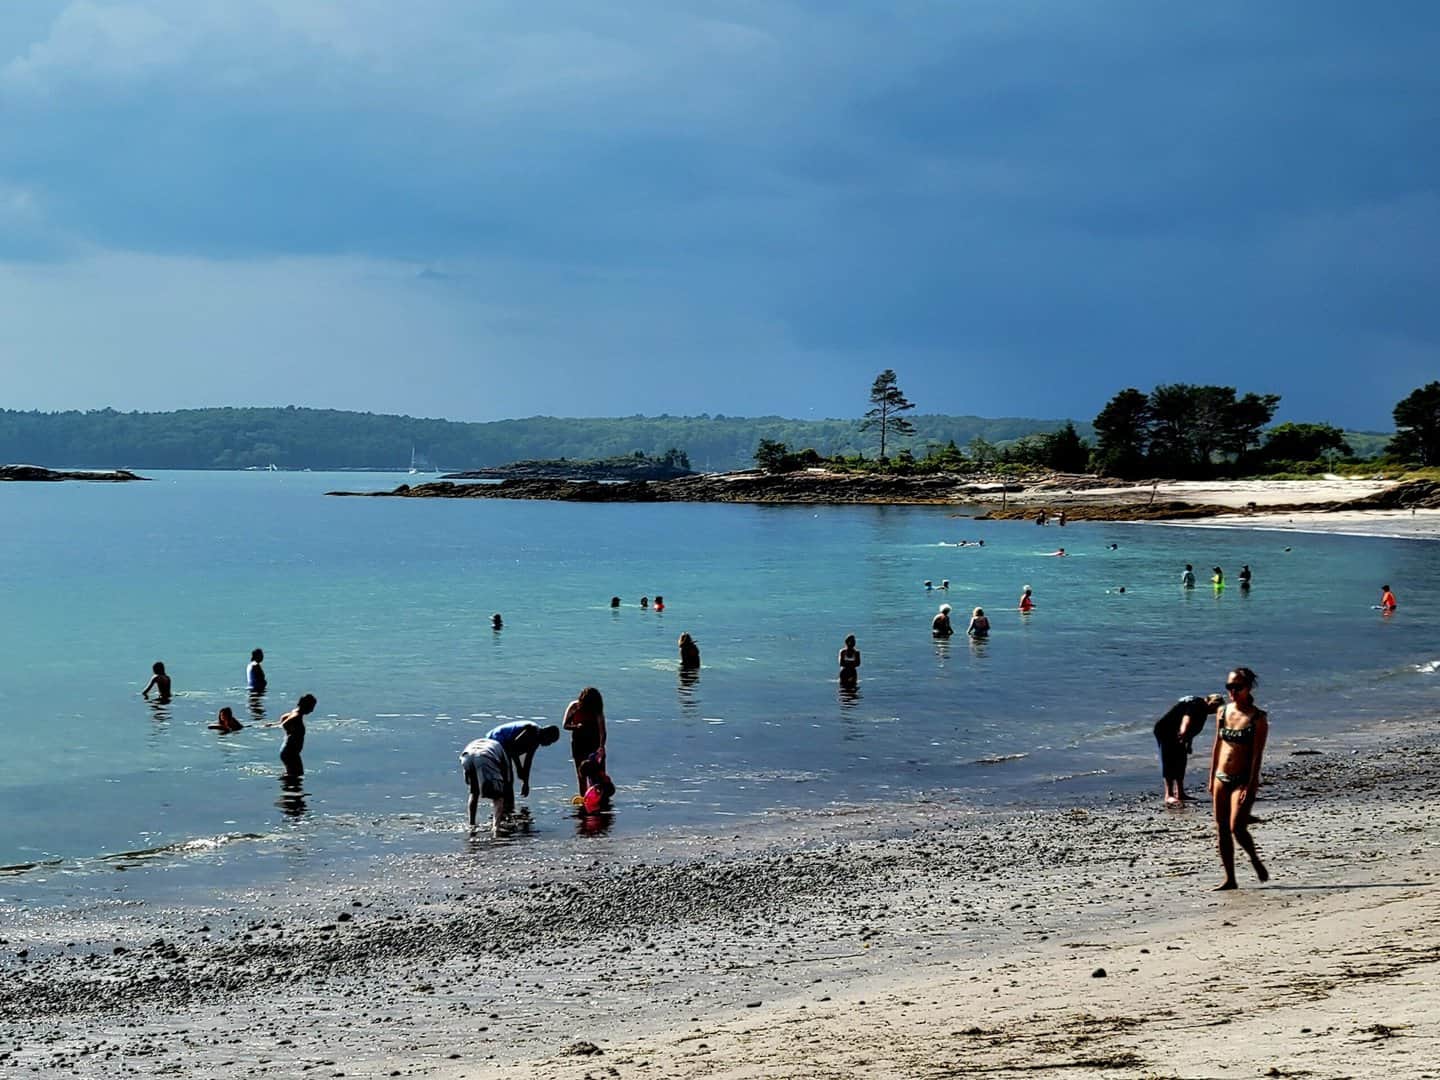 People wading in shallow water at Pemaquid Beach